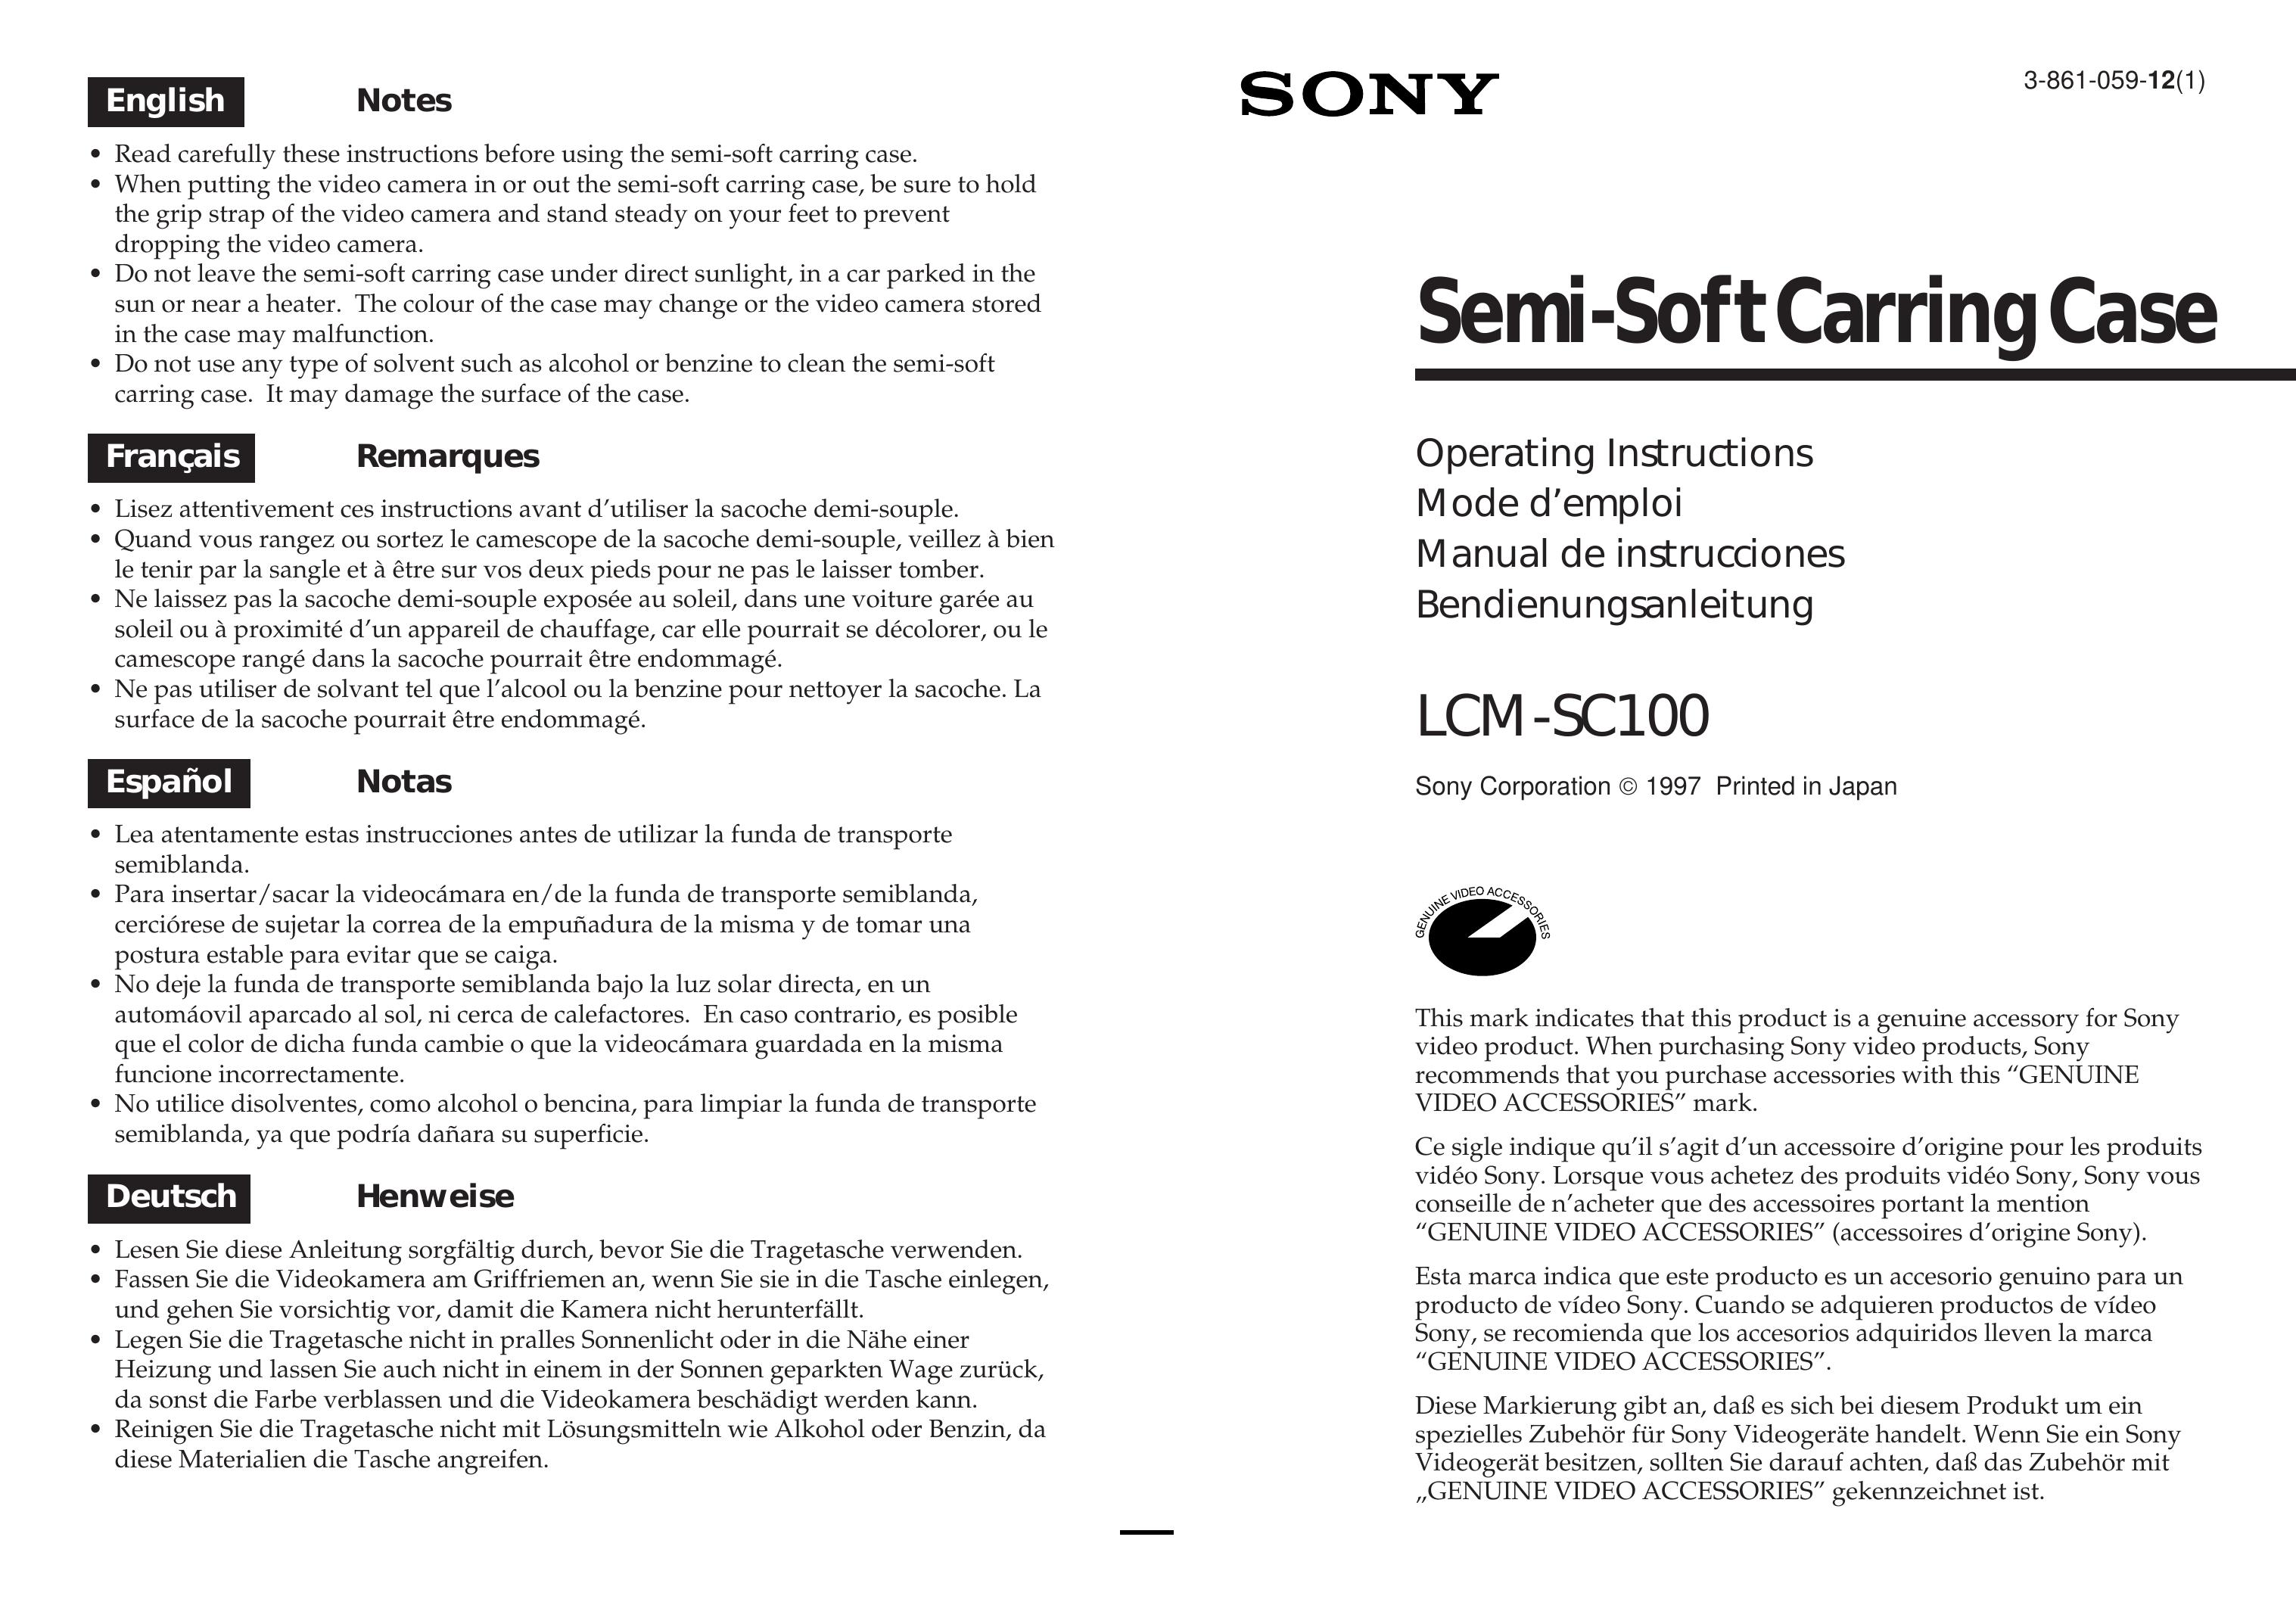 Sony LCM-SC100 Camcorder Accessories User Manual